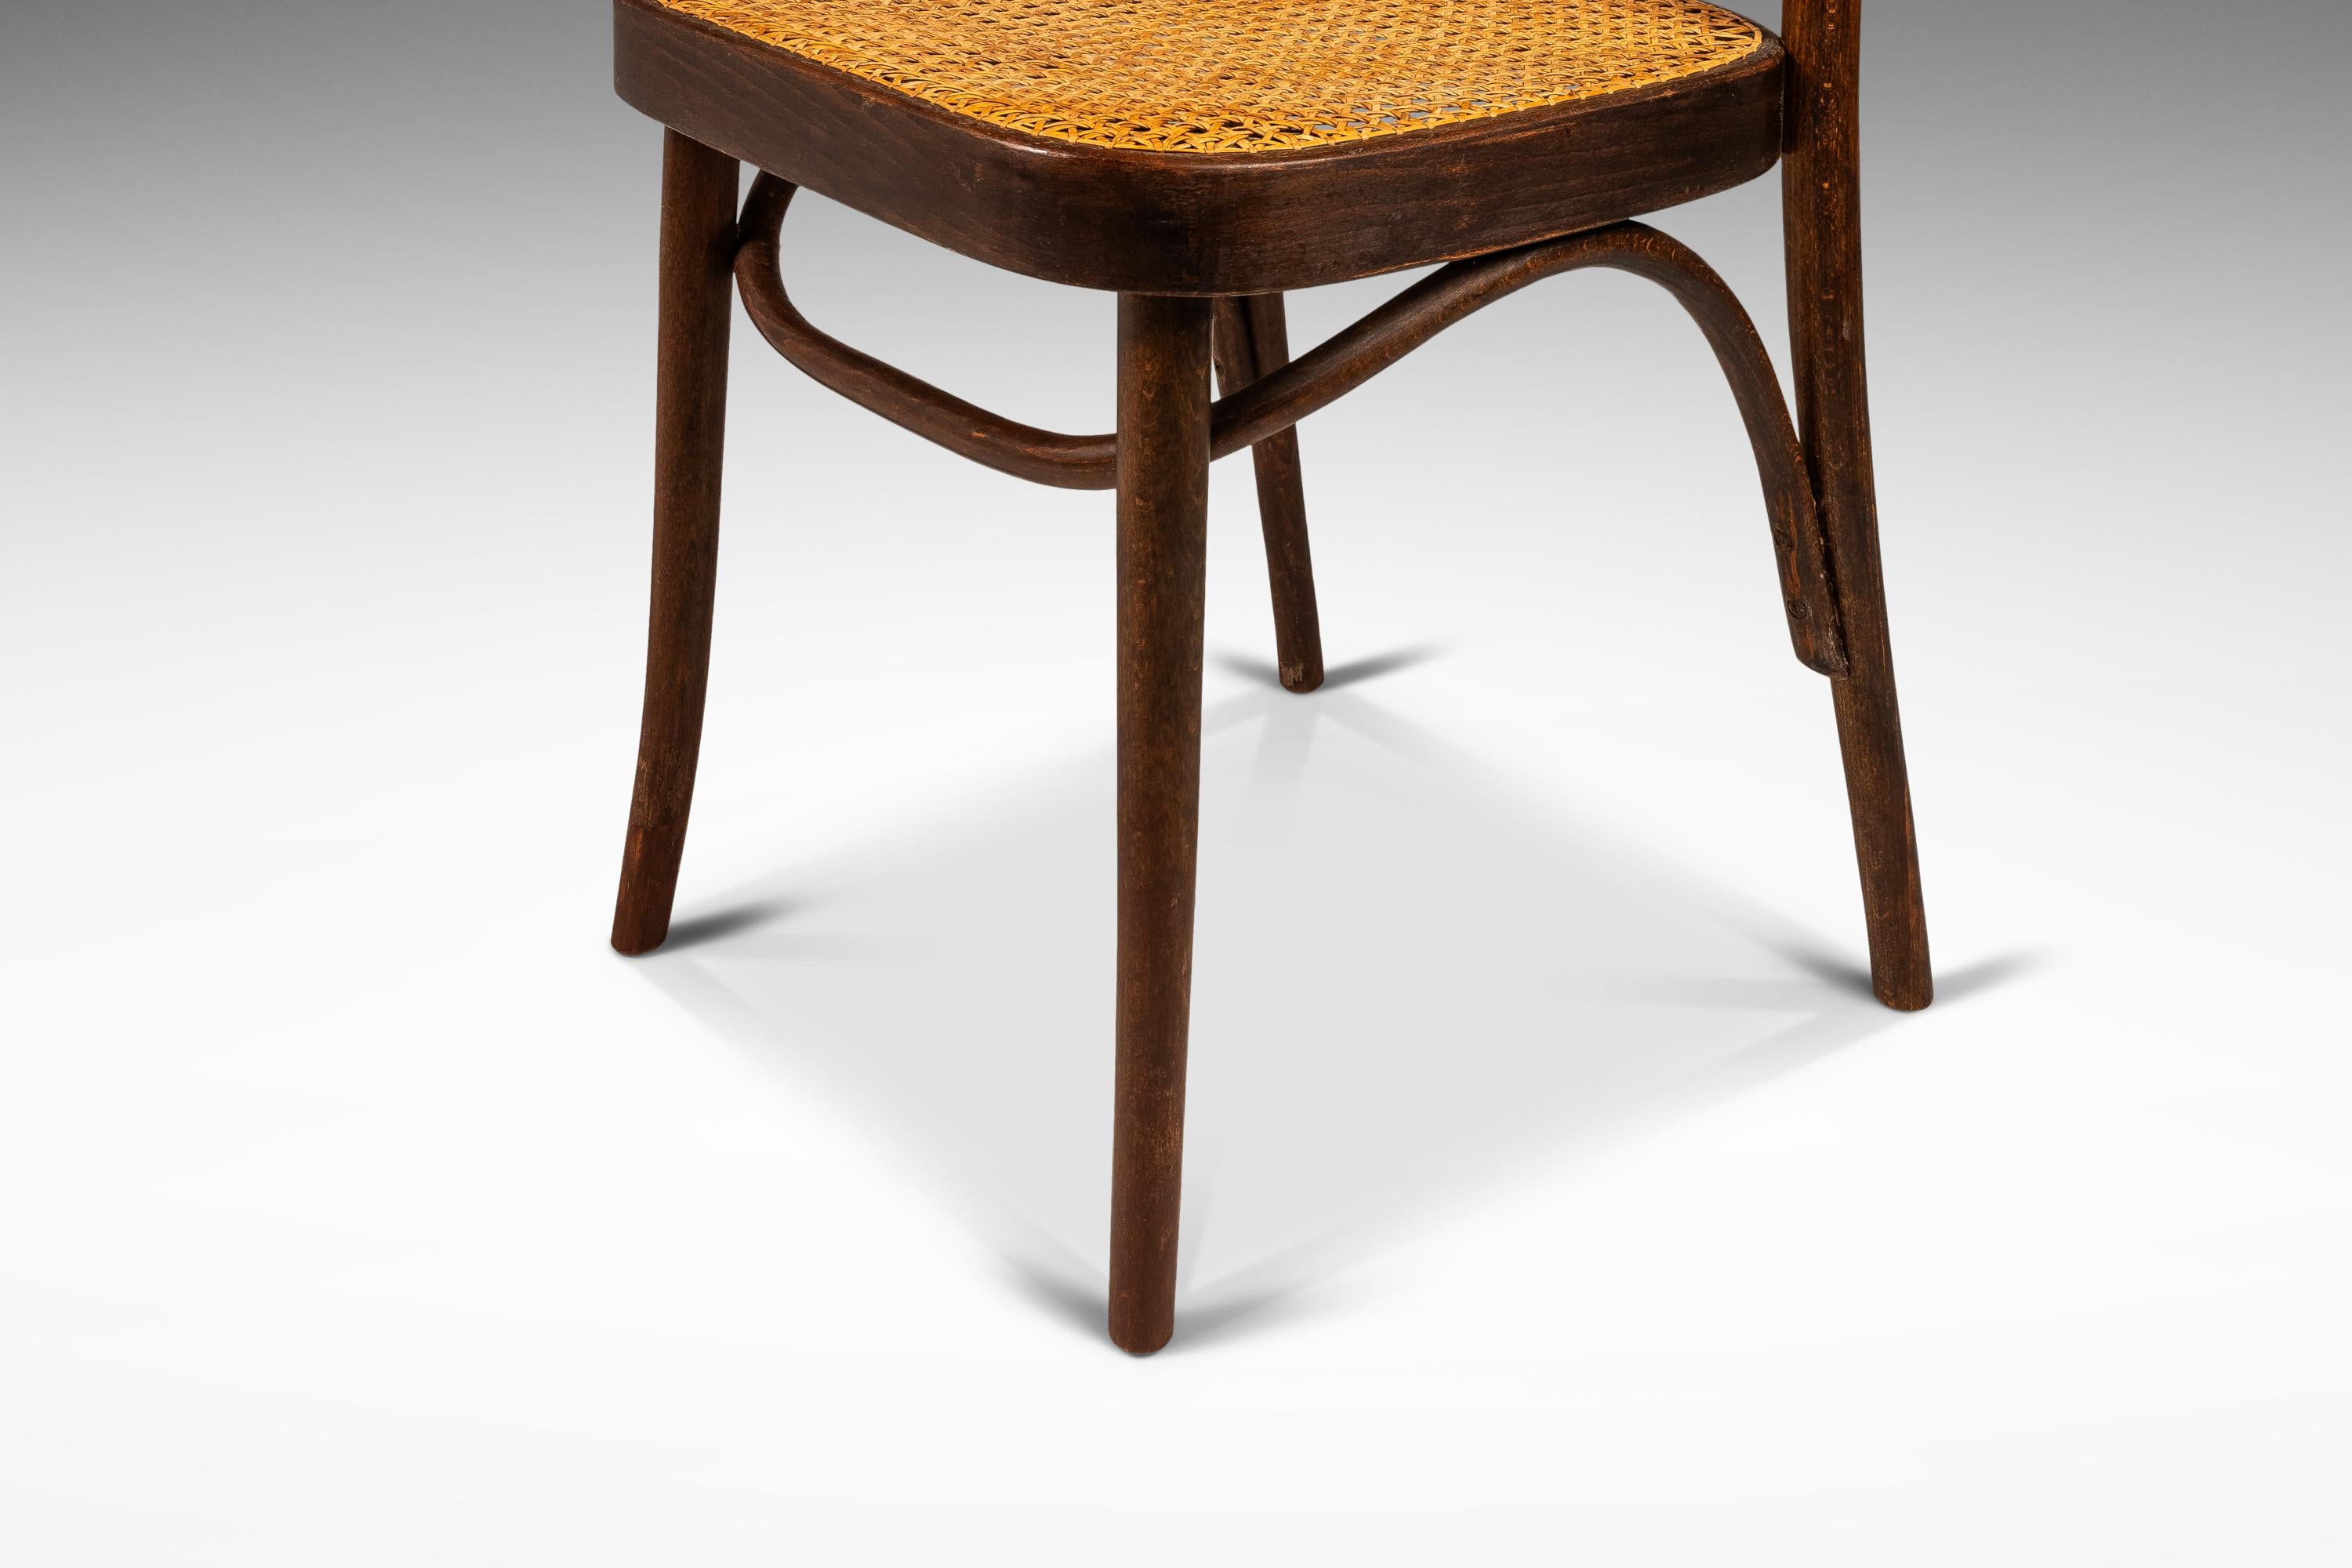 Bentwood Prague Model 811 Chair in Walnut by Josef Frank, Poland, c. 1960s For Sale 12